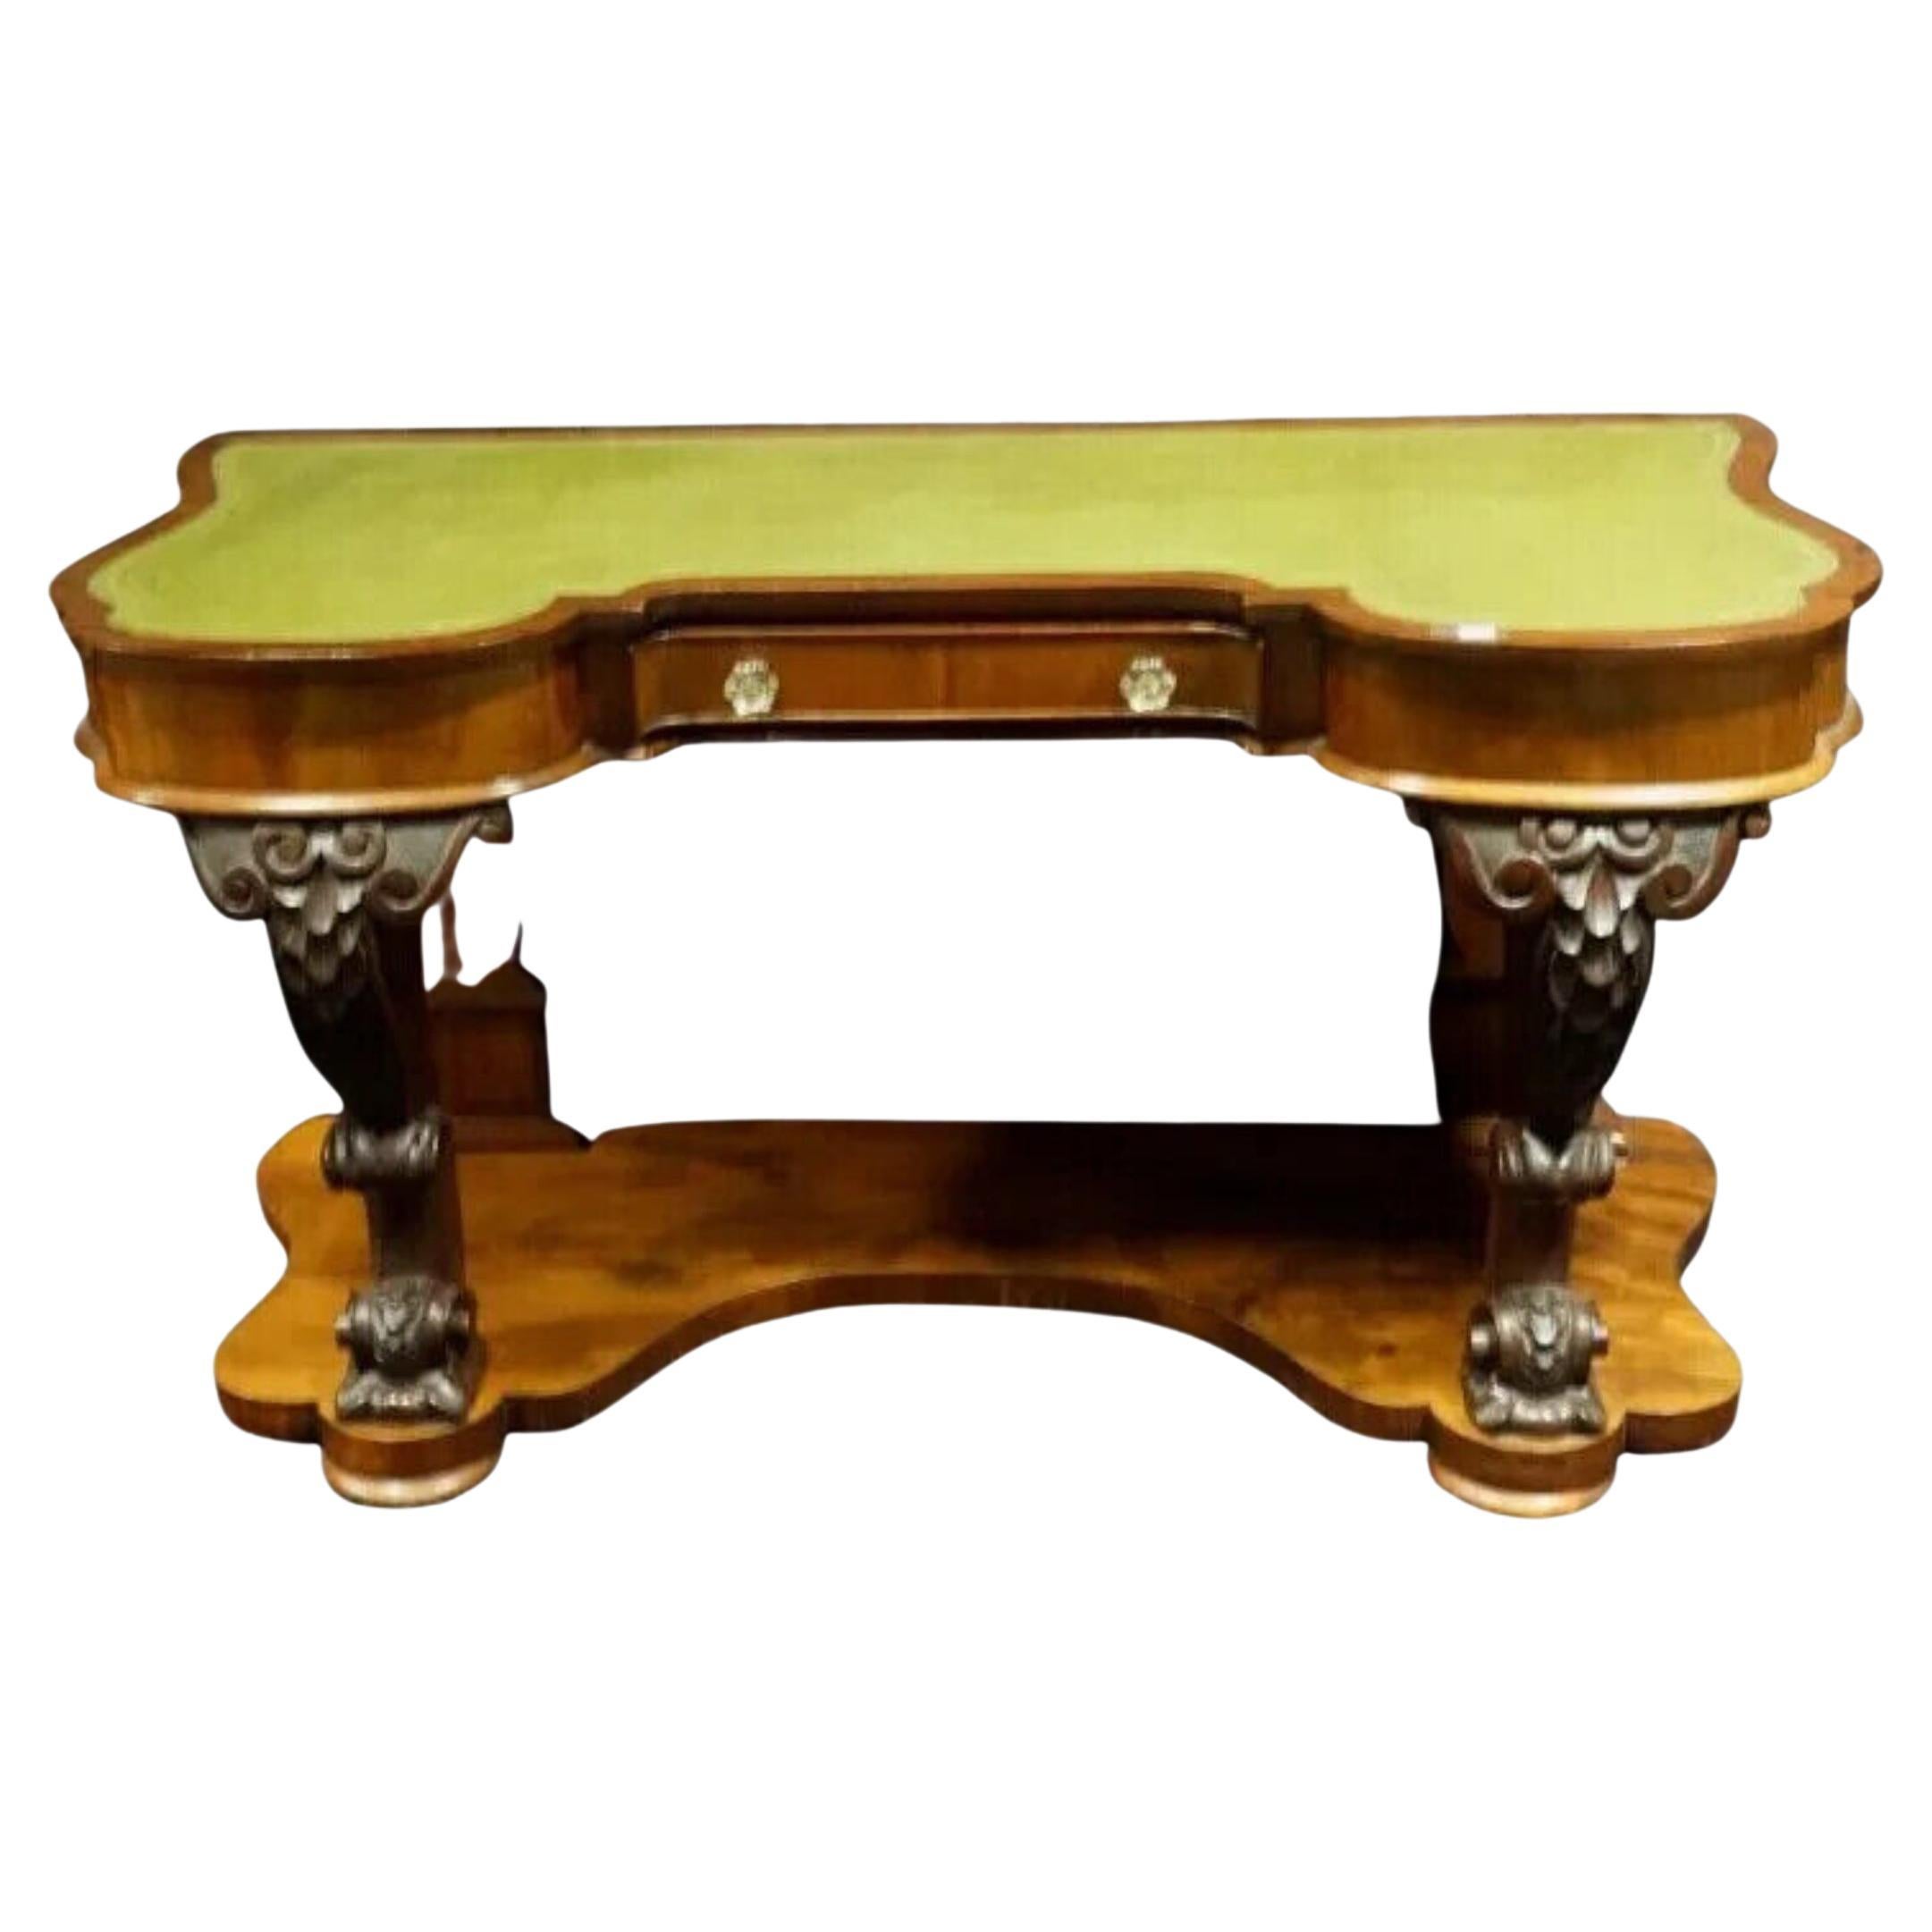 Antique Desk, Carved, Empire, Tooled Leather Top, Elegant, 19th C., 1800's!! For Sale